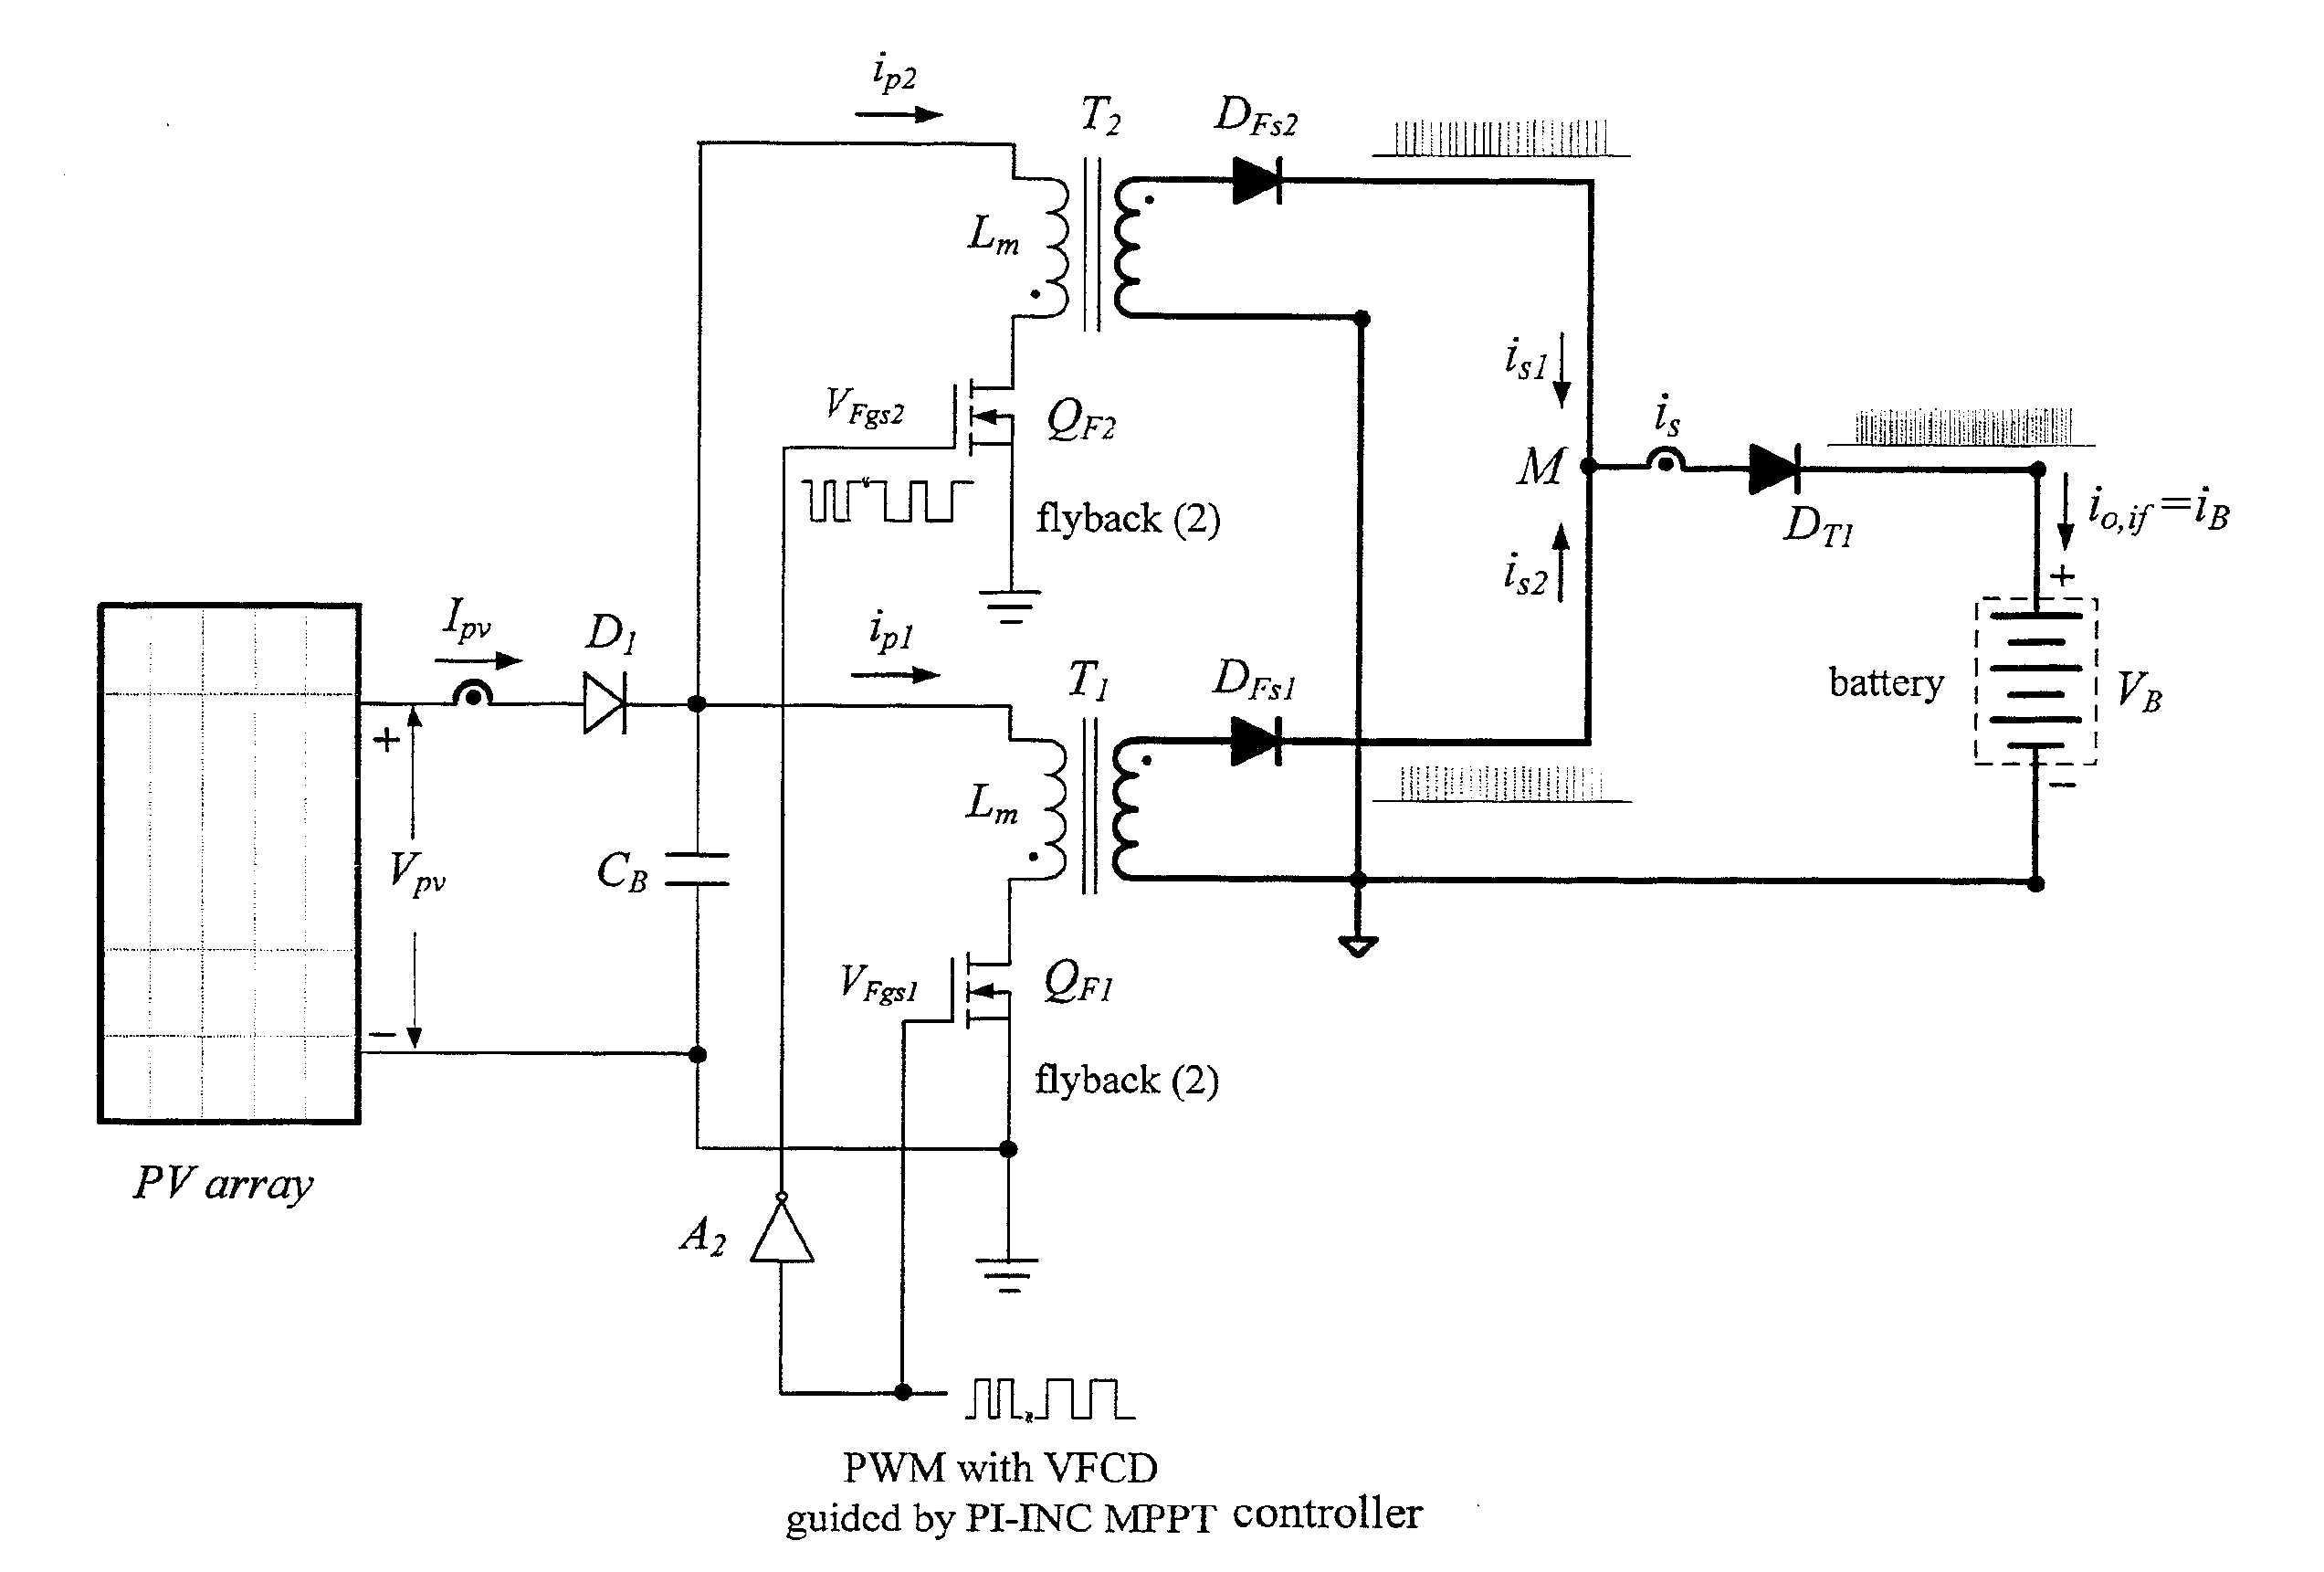 Photovoltaic System Having Power-Increment-Aided Incremental-Conductance Maximum Power Point Tracking Controller Using Variable-Frequency and Constant-Duty Control and Method Thereof